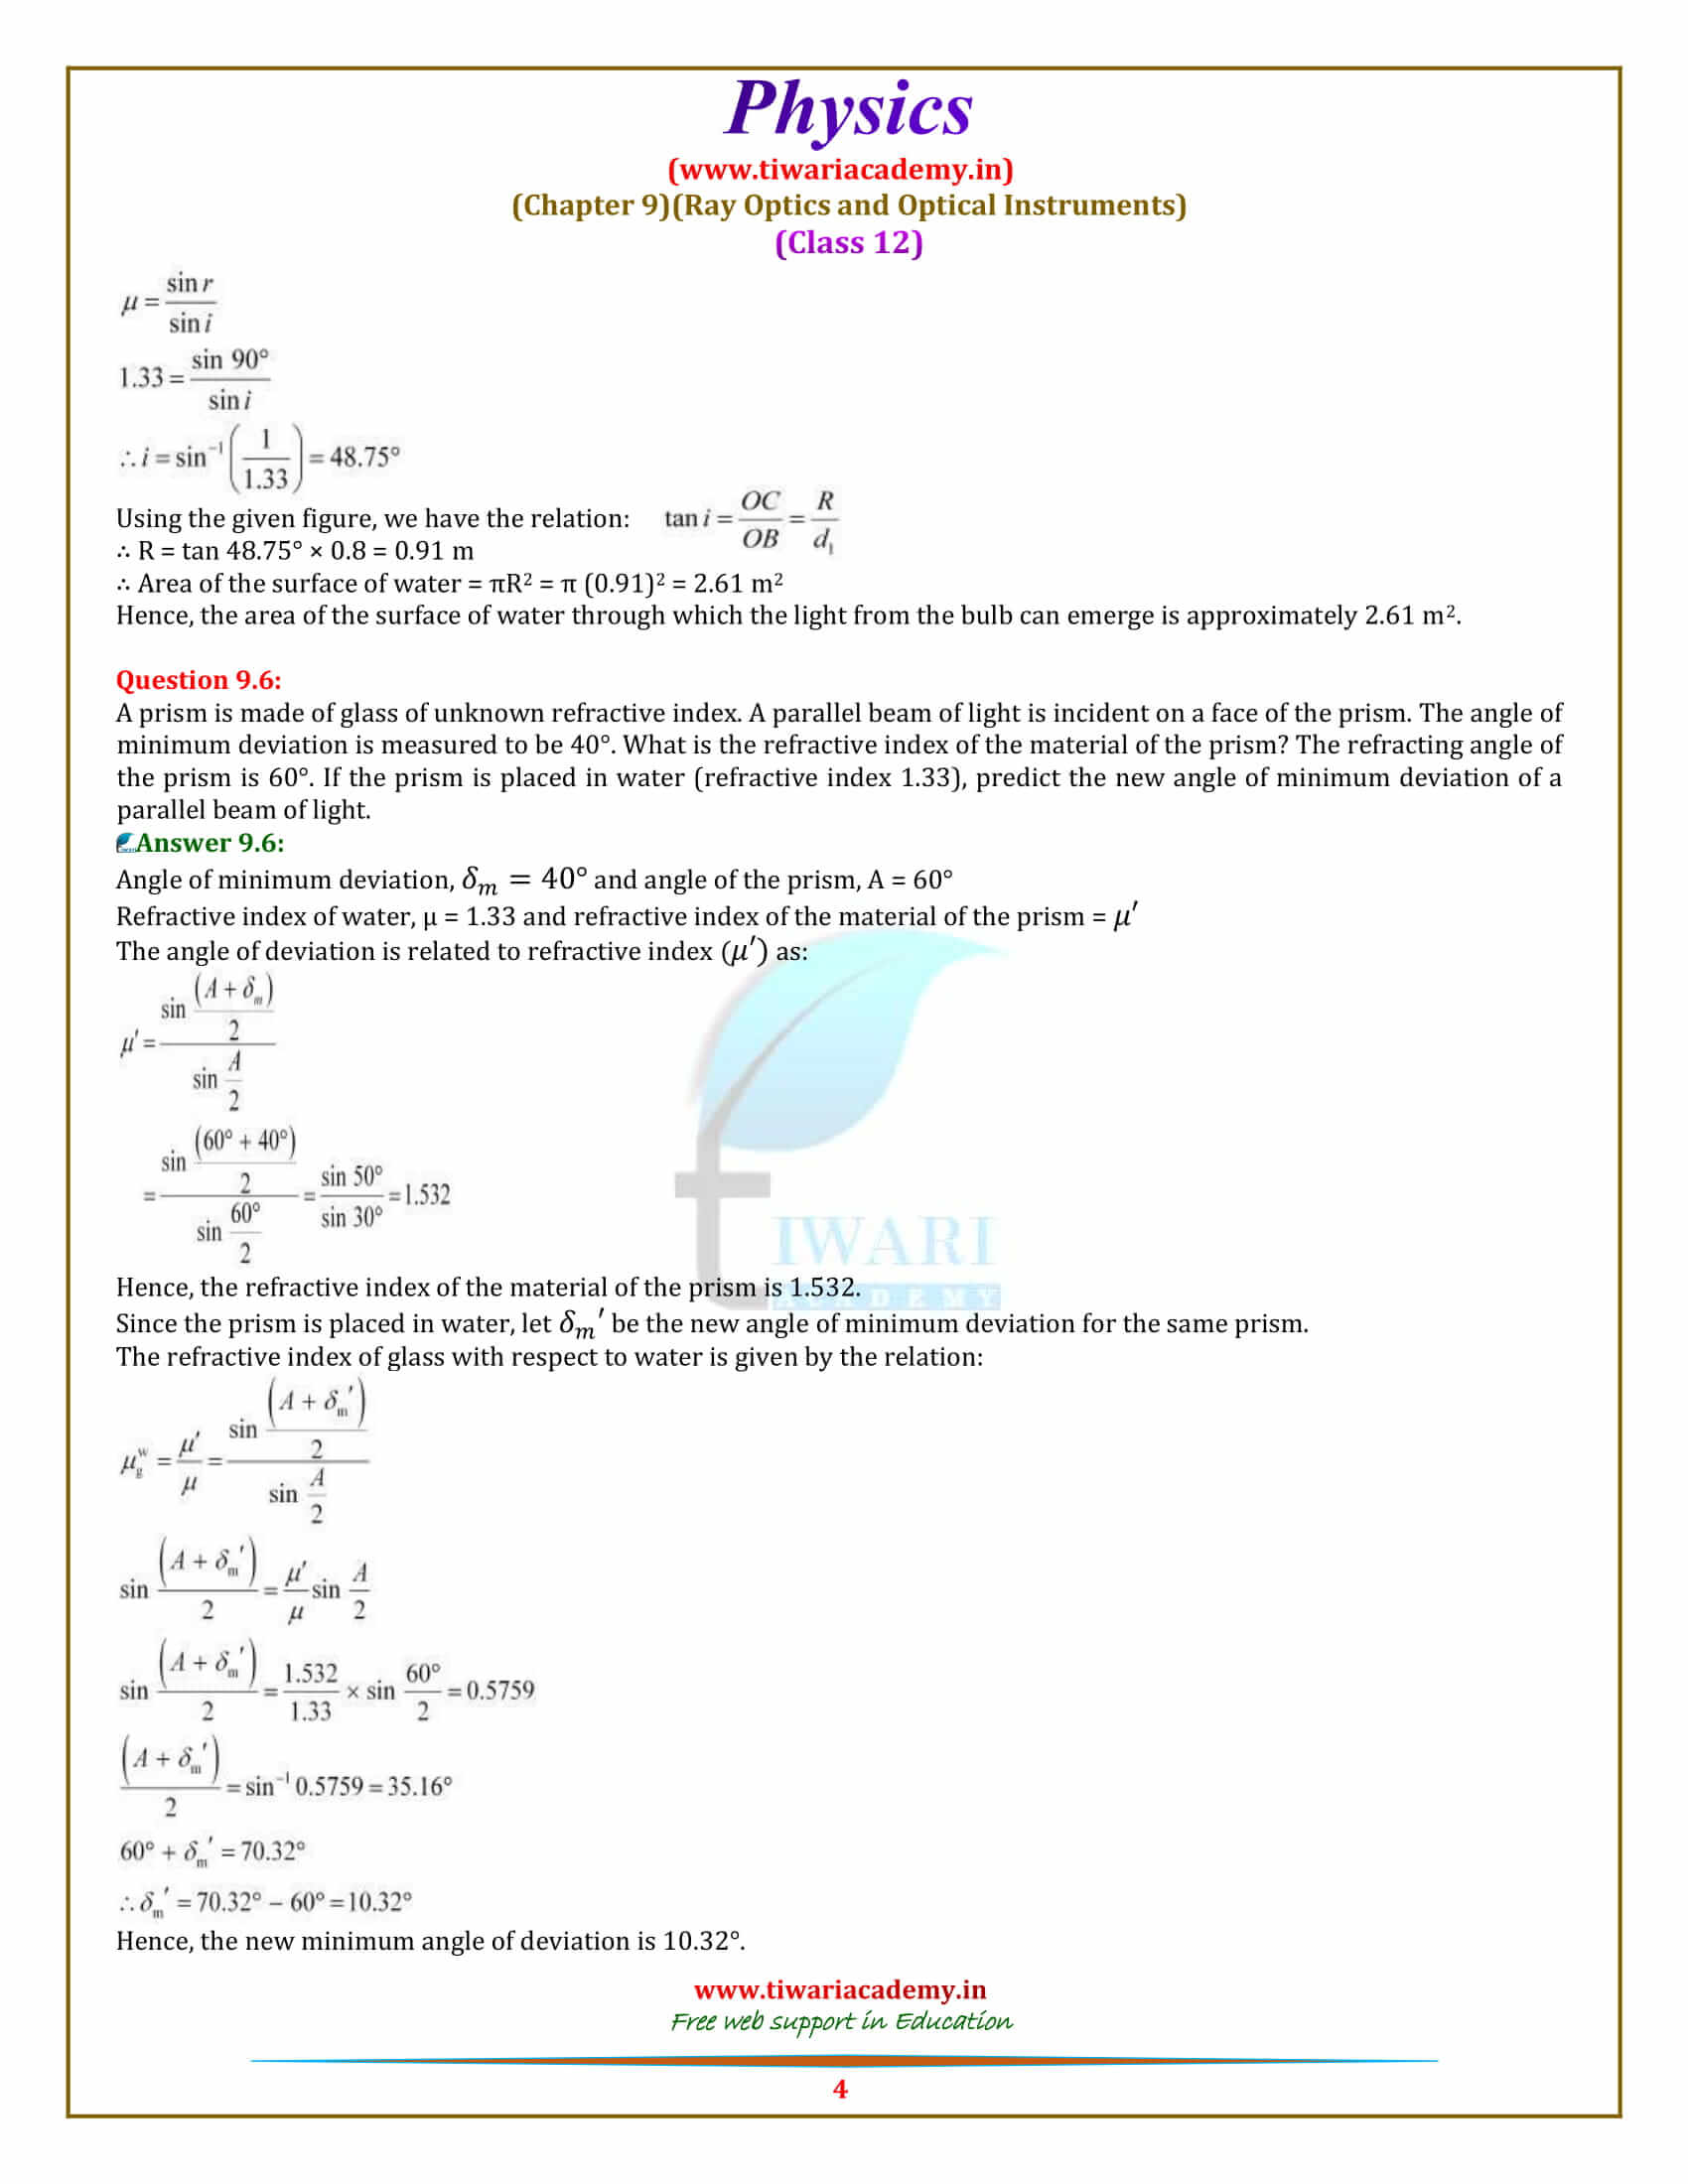 NCERT Solutions for Class 12 Physics Chapter 9 Ray Optics